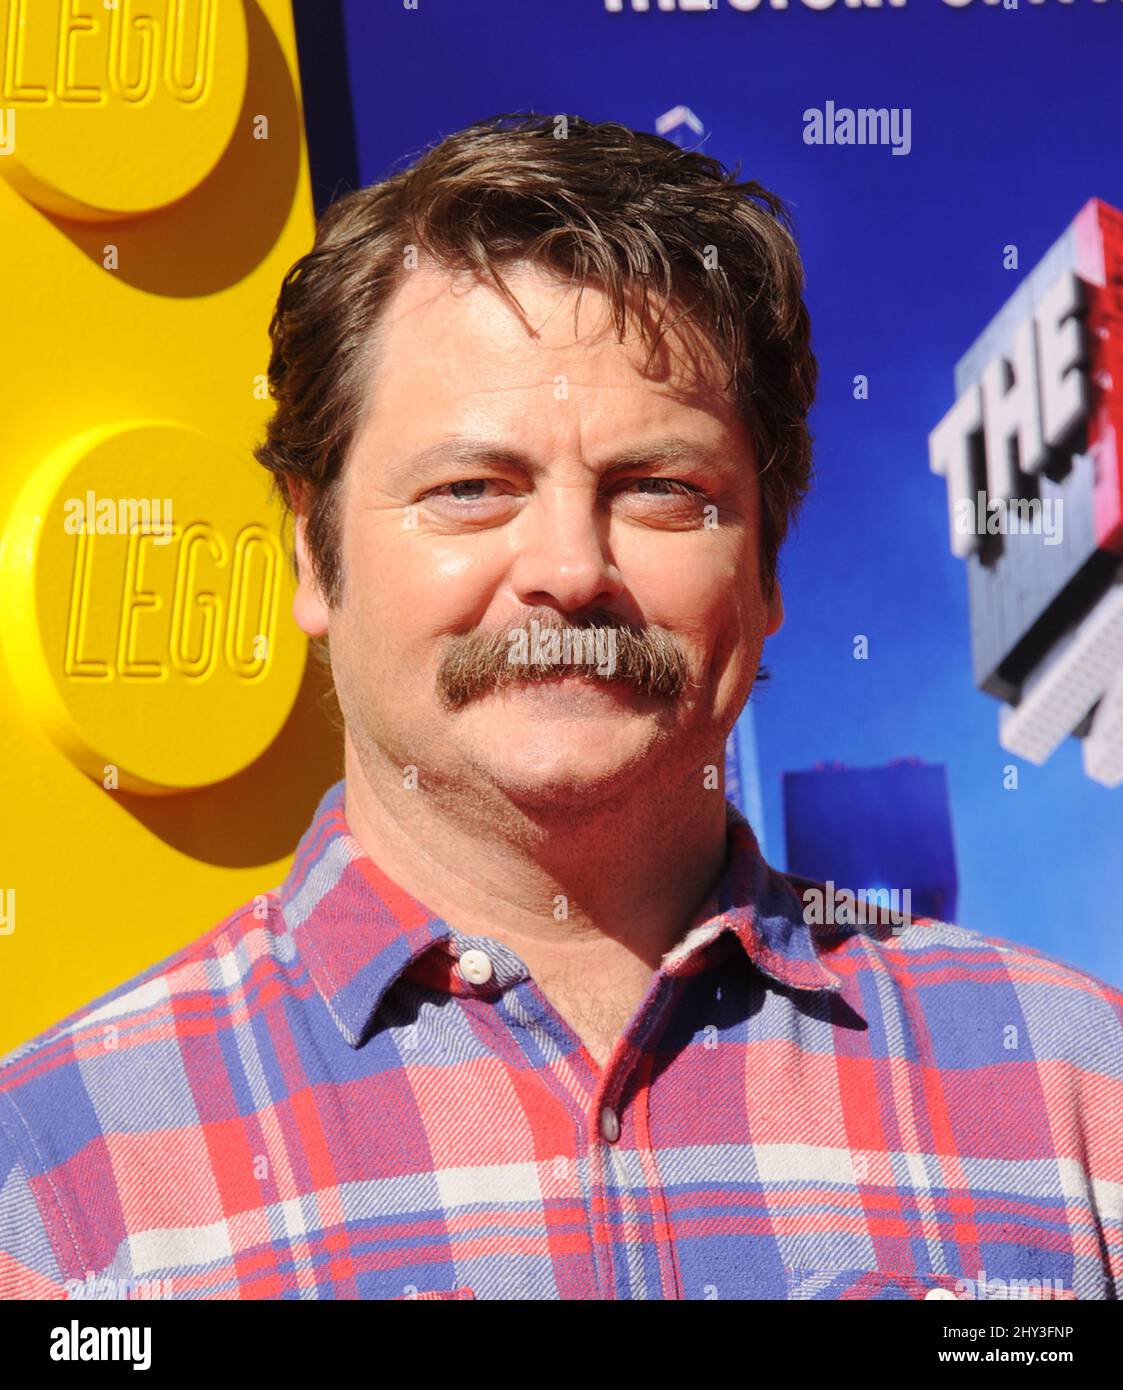 Nick Offerman at the premiere of the Lego Movie in Los Angeles CA